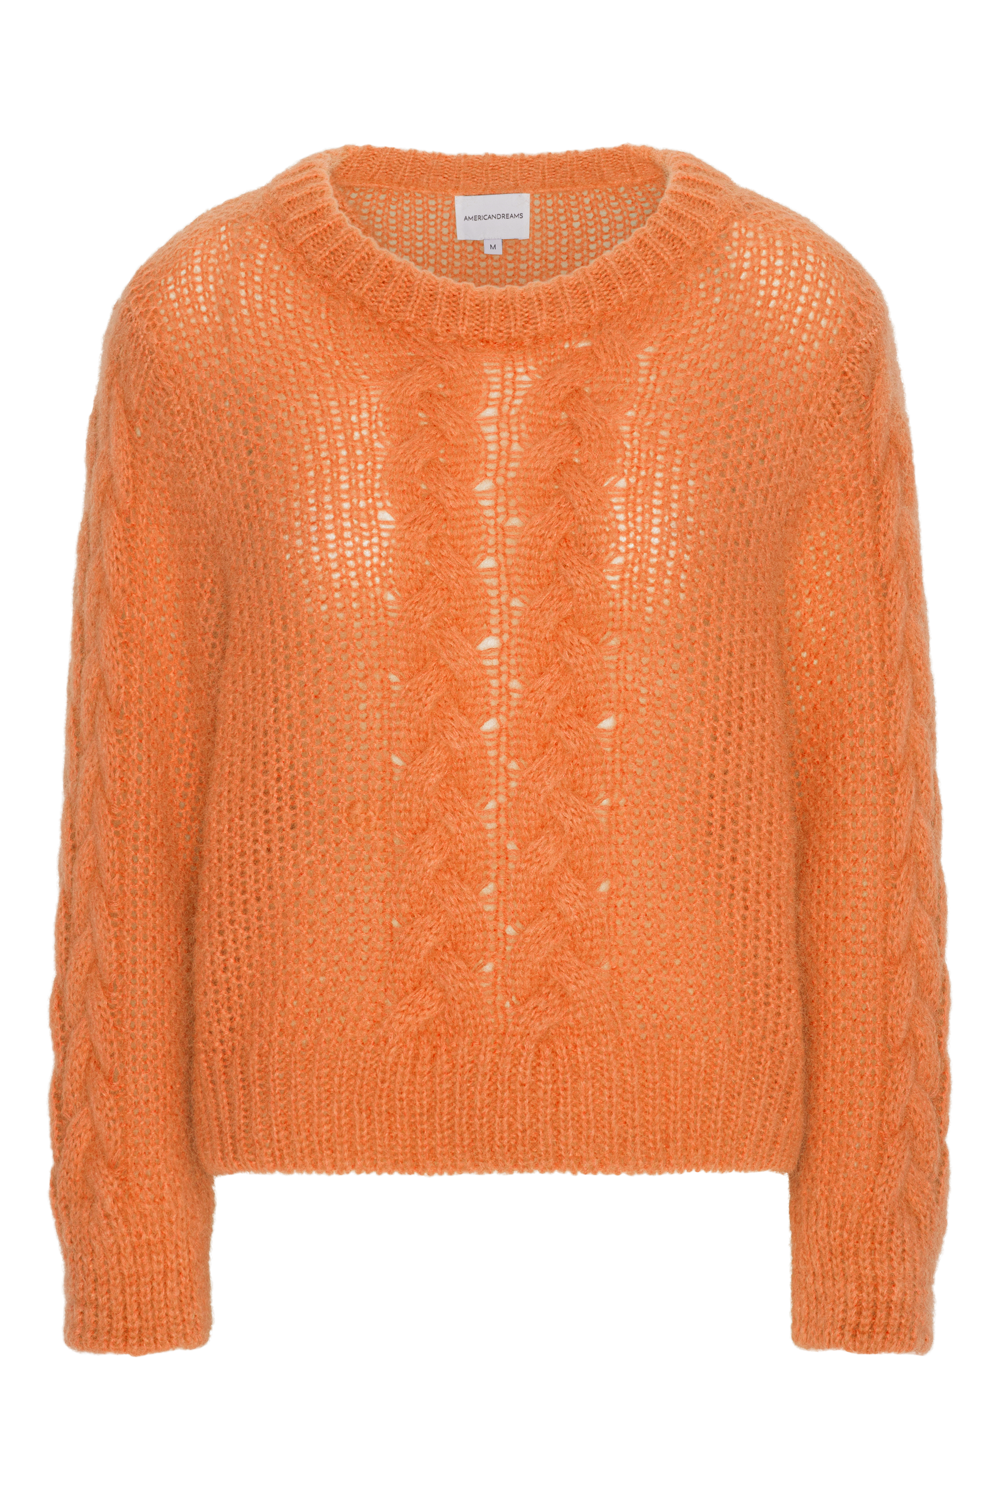 Louisa Cable Knit Pullover Orange - Sample